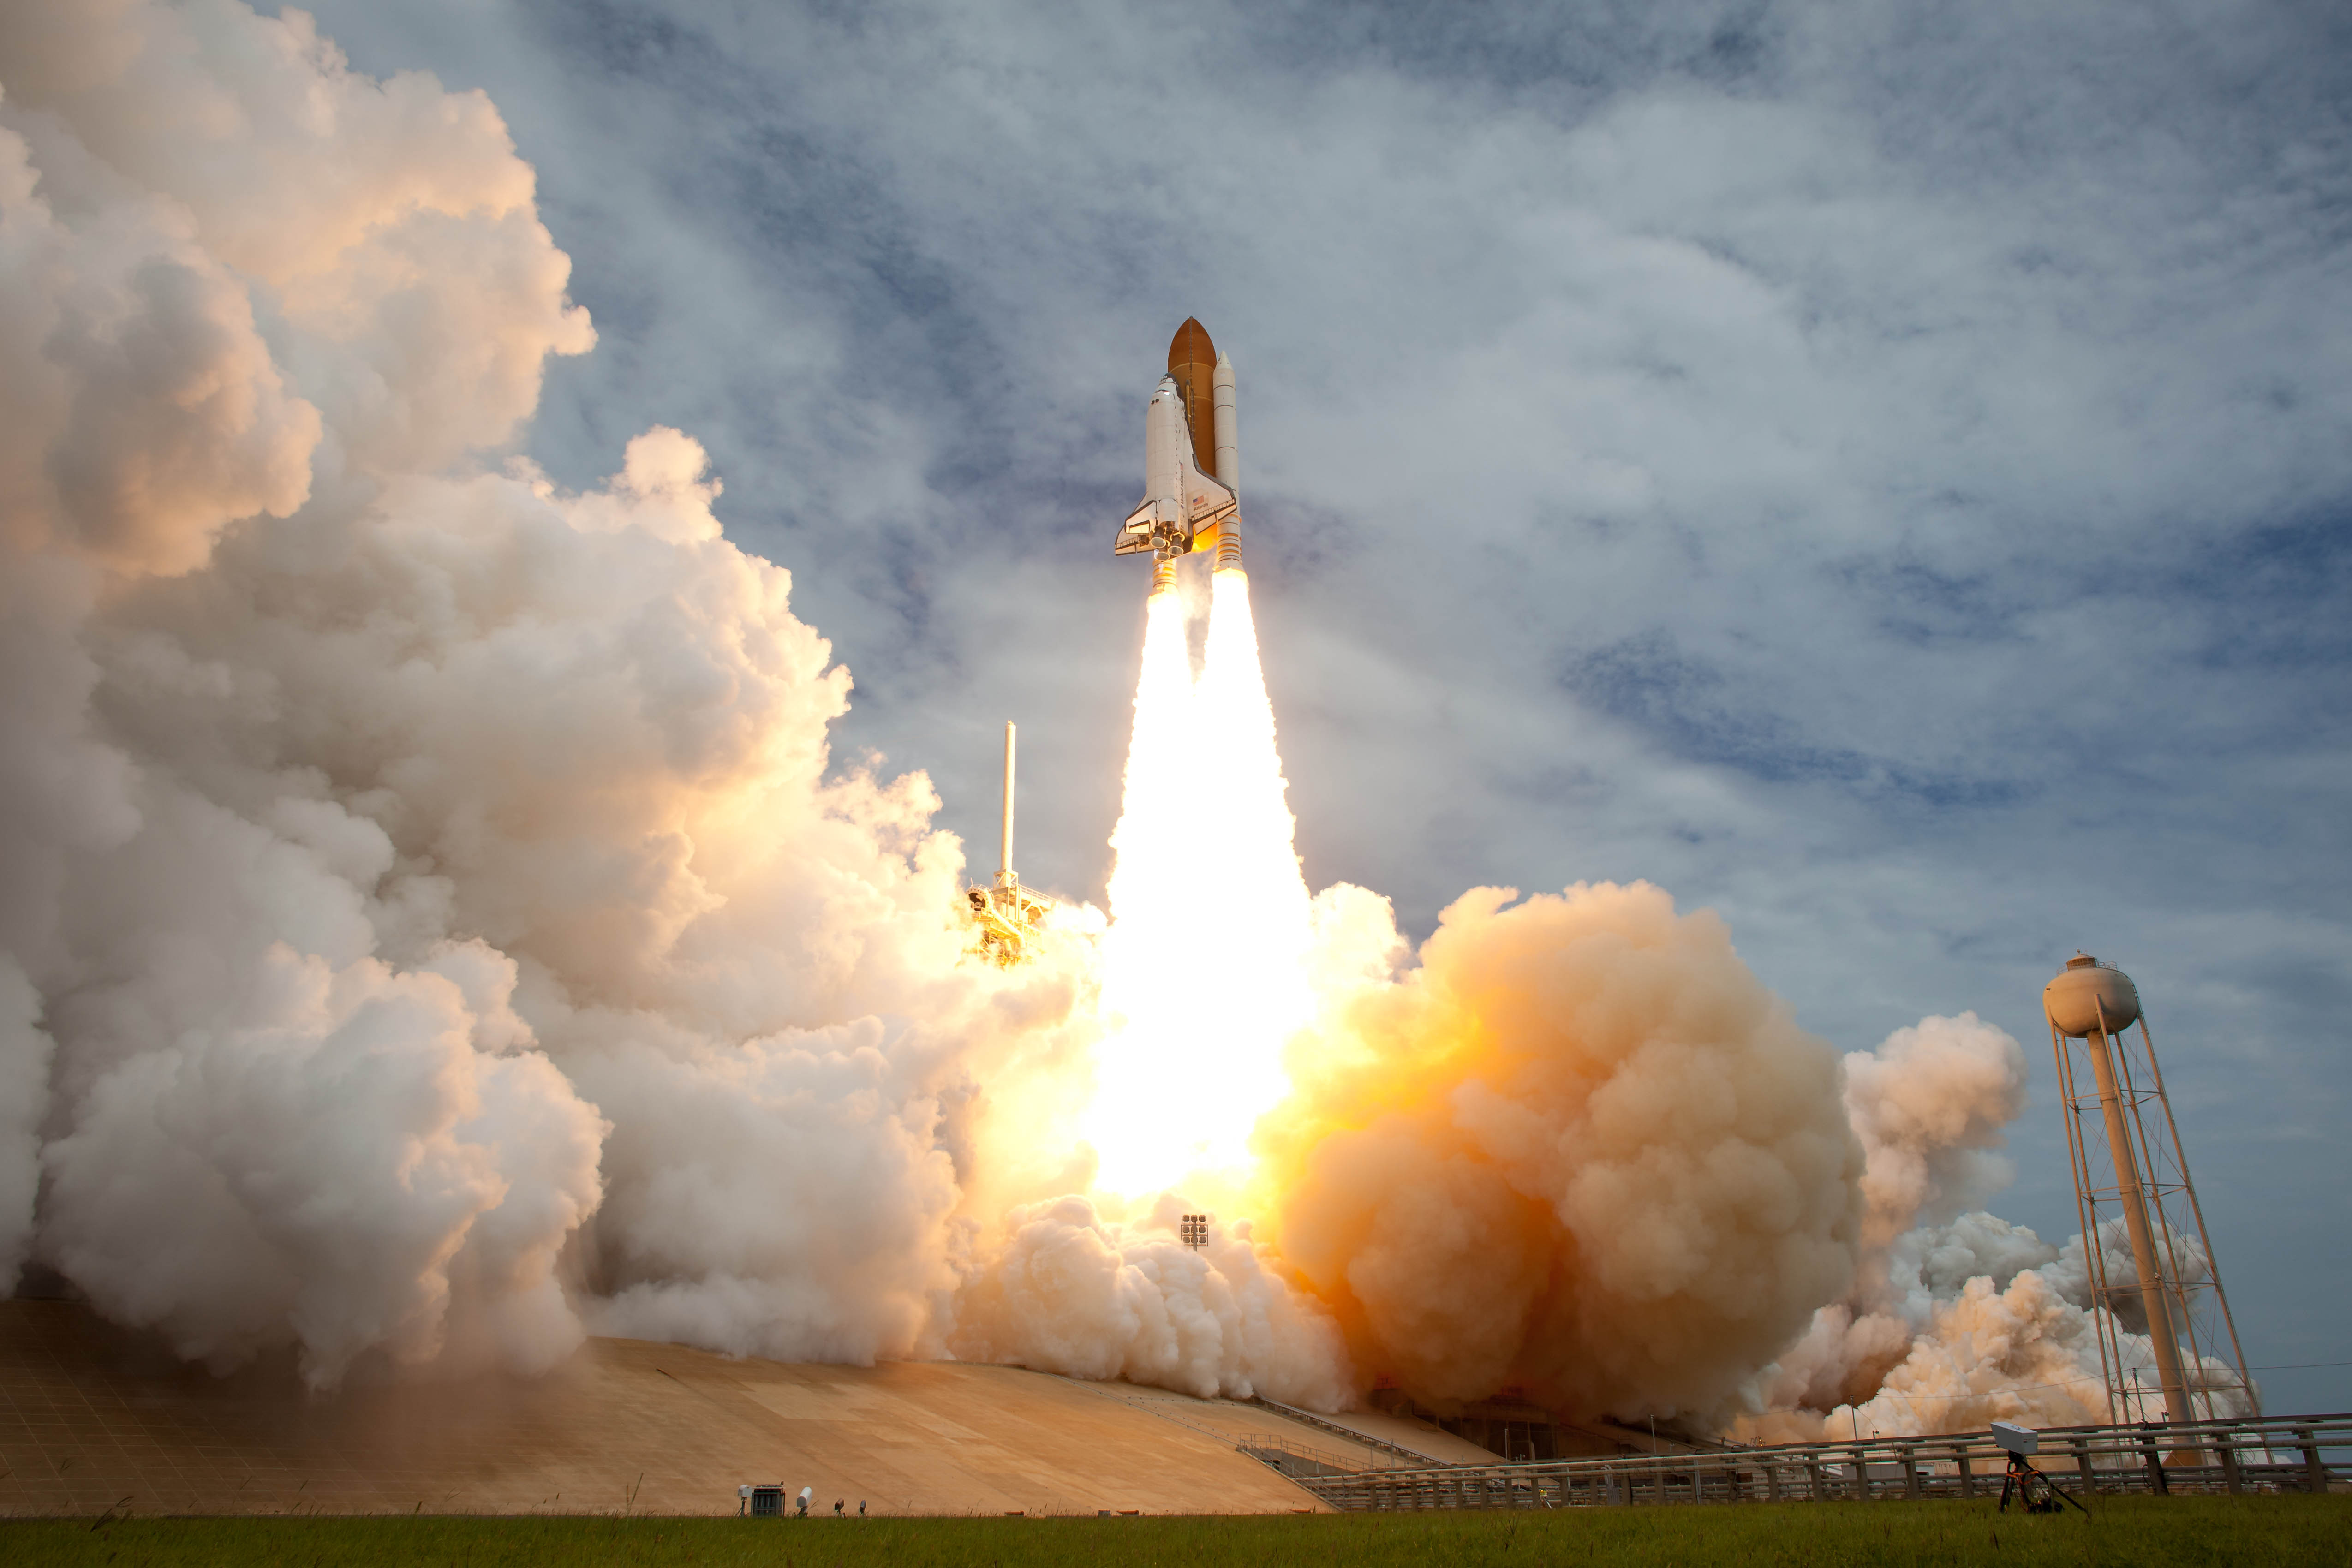 File:Final mission of Space Shuttle launches.jpg - Wikimedia Commons